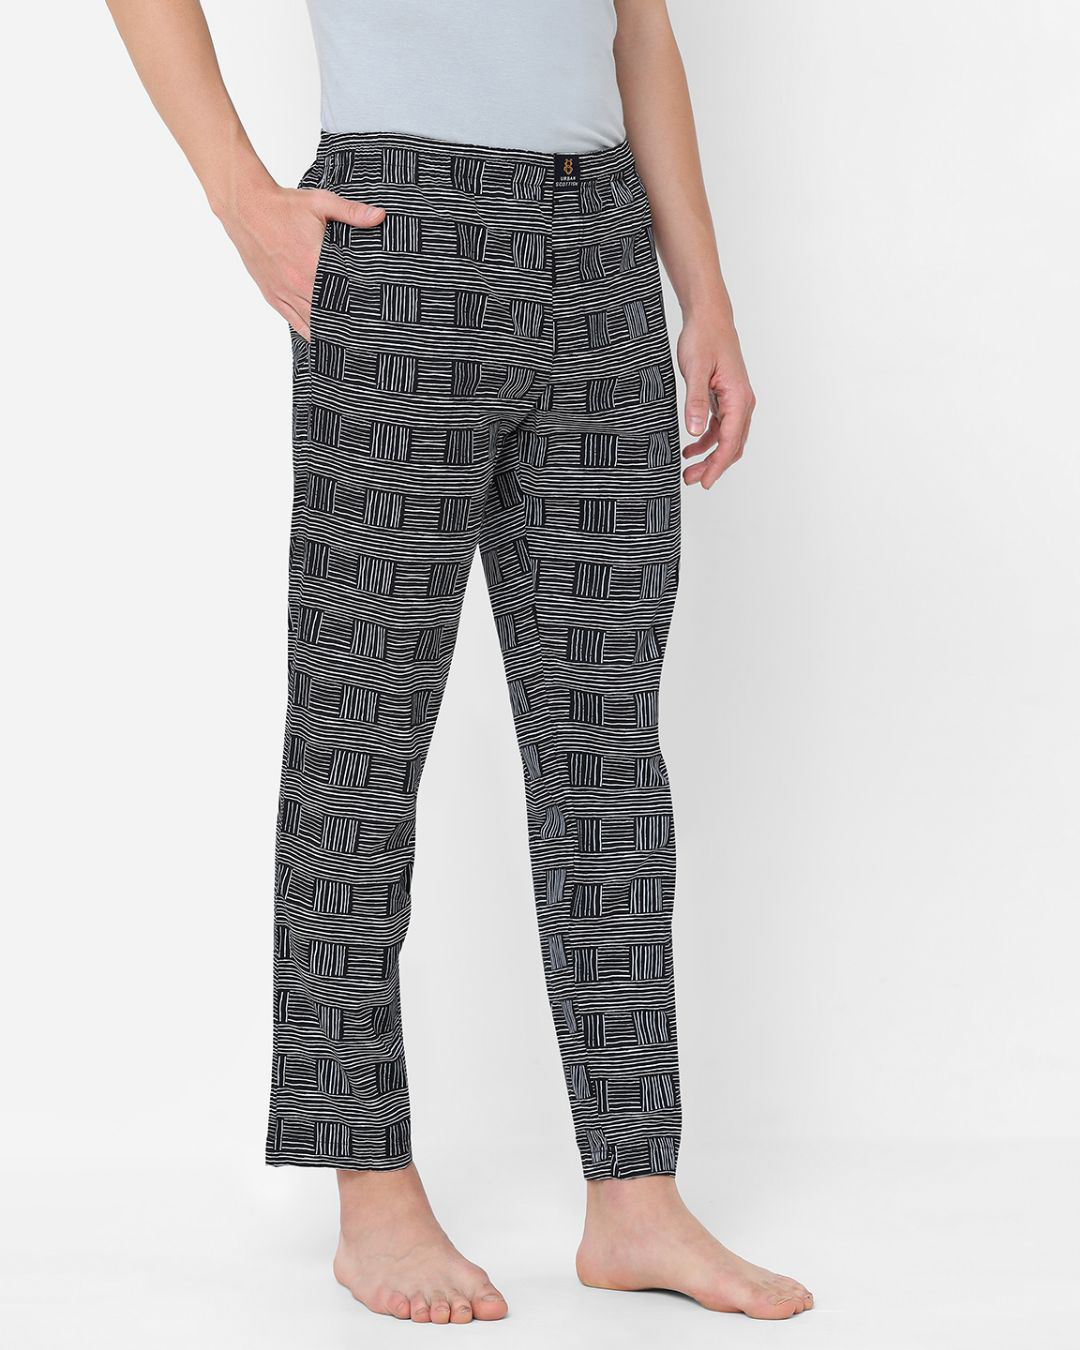 Shop Men's Black All Over Abstract Printed Cotton Lounge Pants-Back